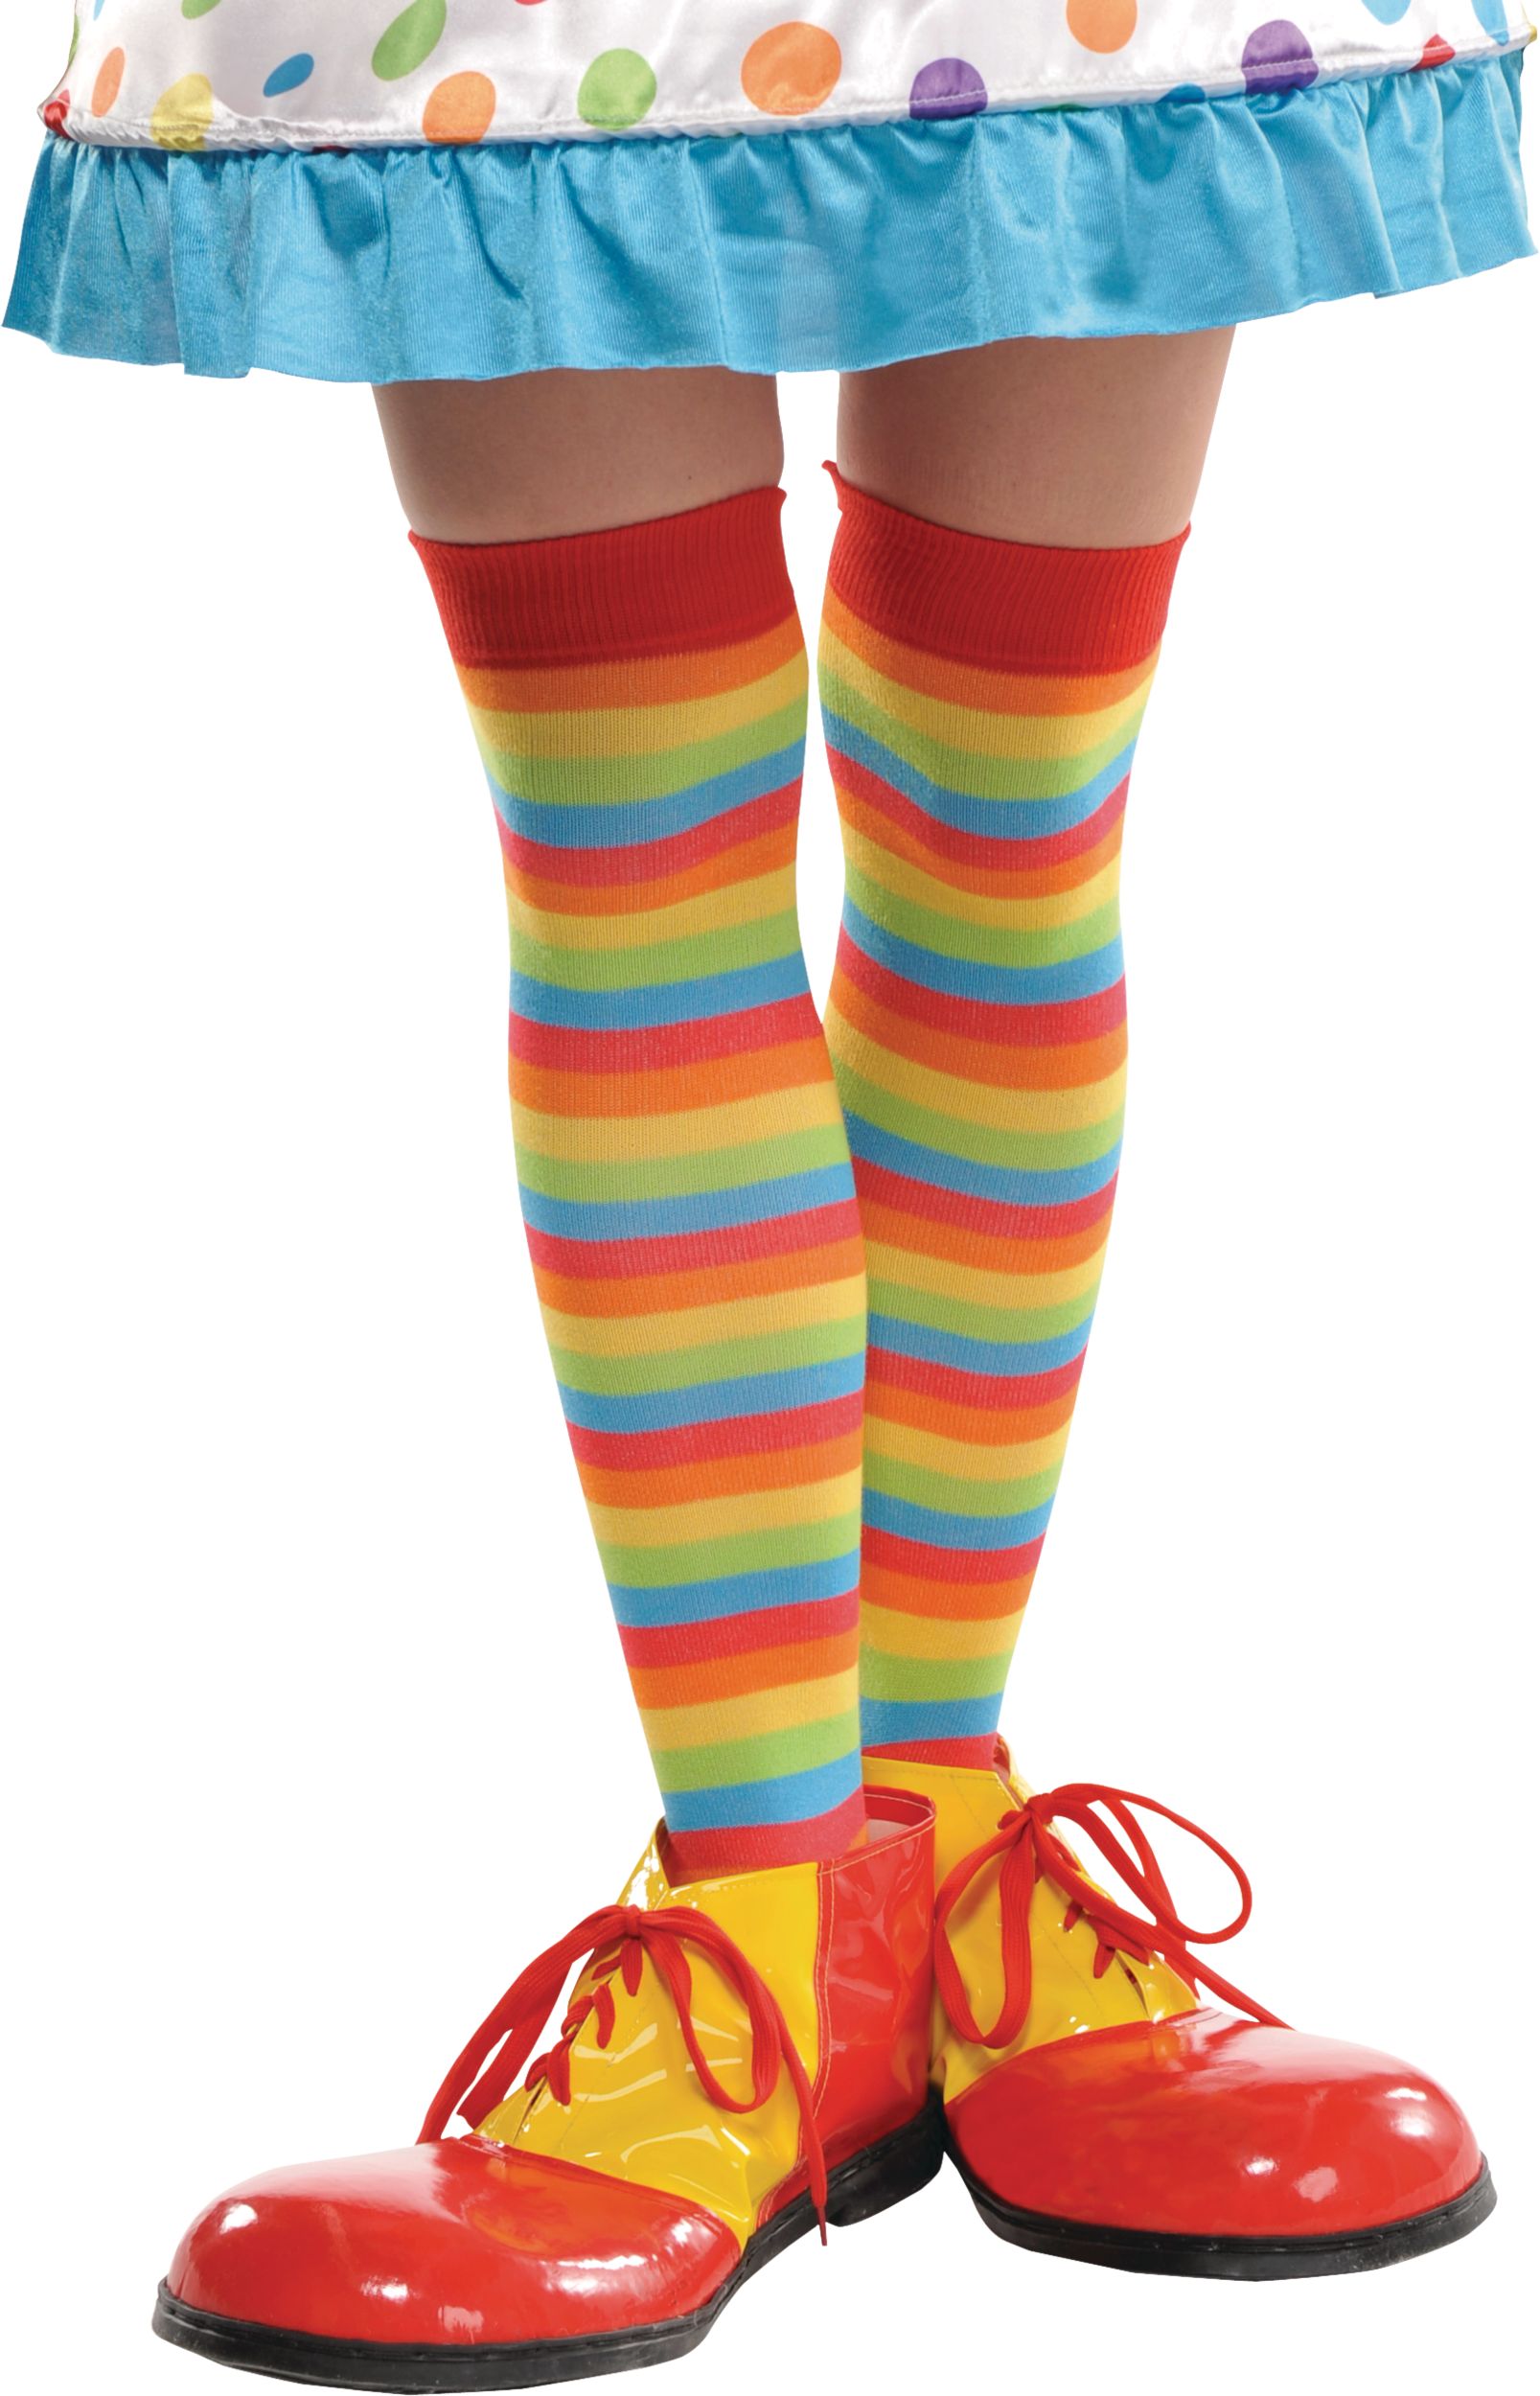 Skeleteen Colorful Rainbow Striped Socks - Over The Knee Clown Striped  Costume Accessories Thigh High Stockings for Men, Women and Kids